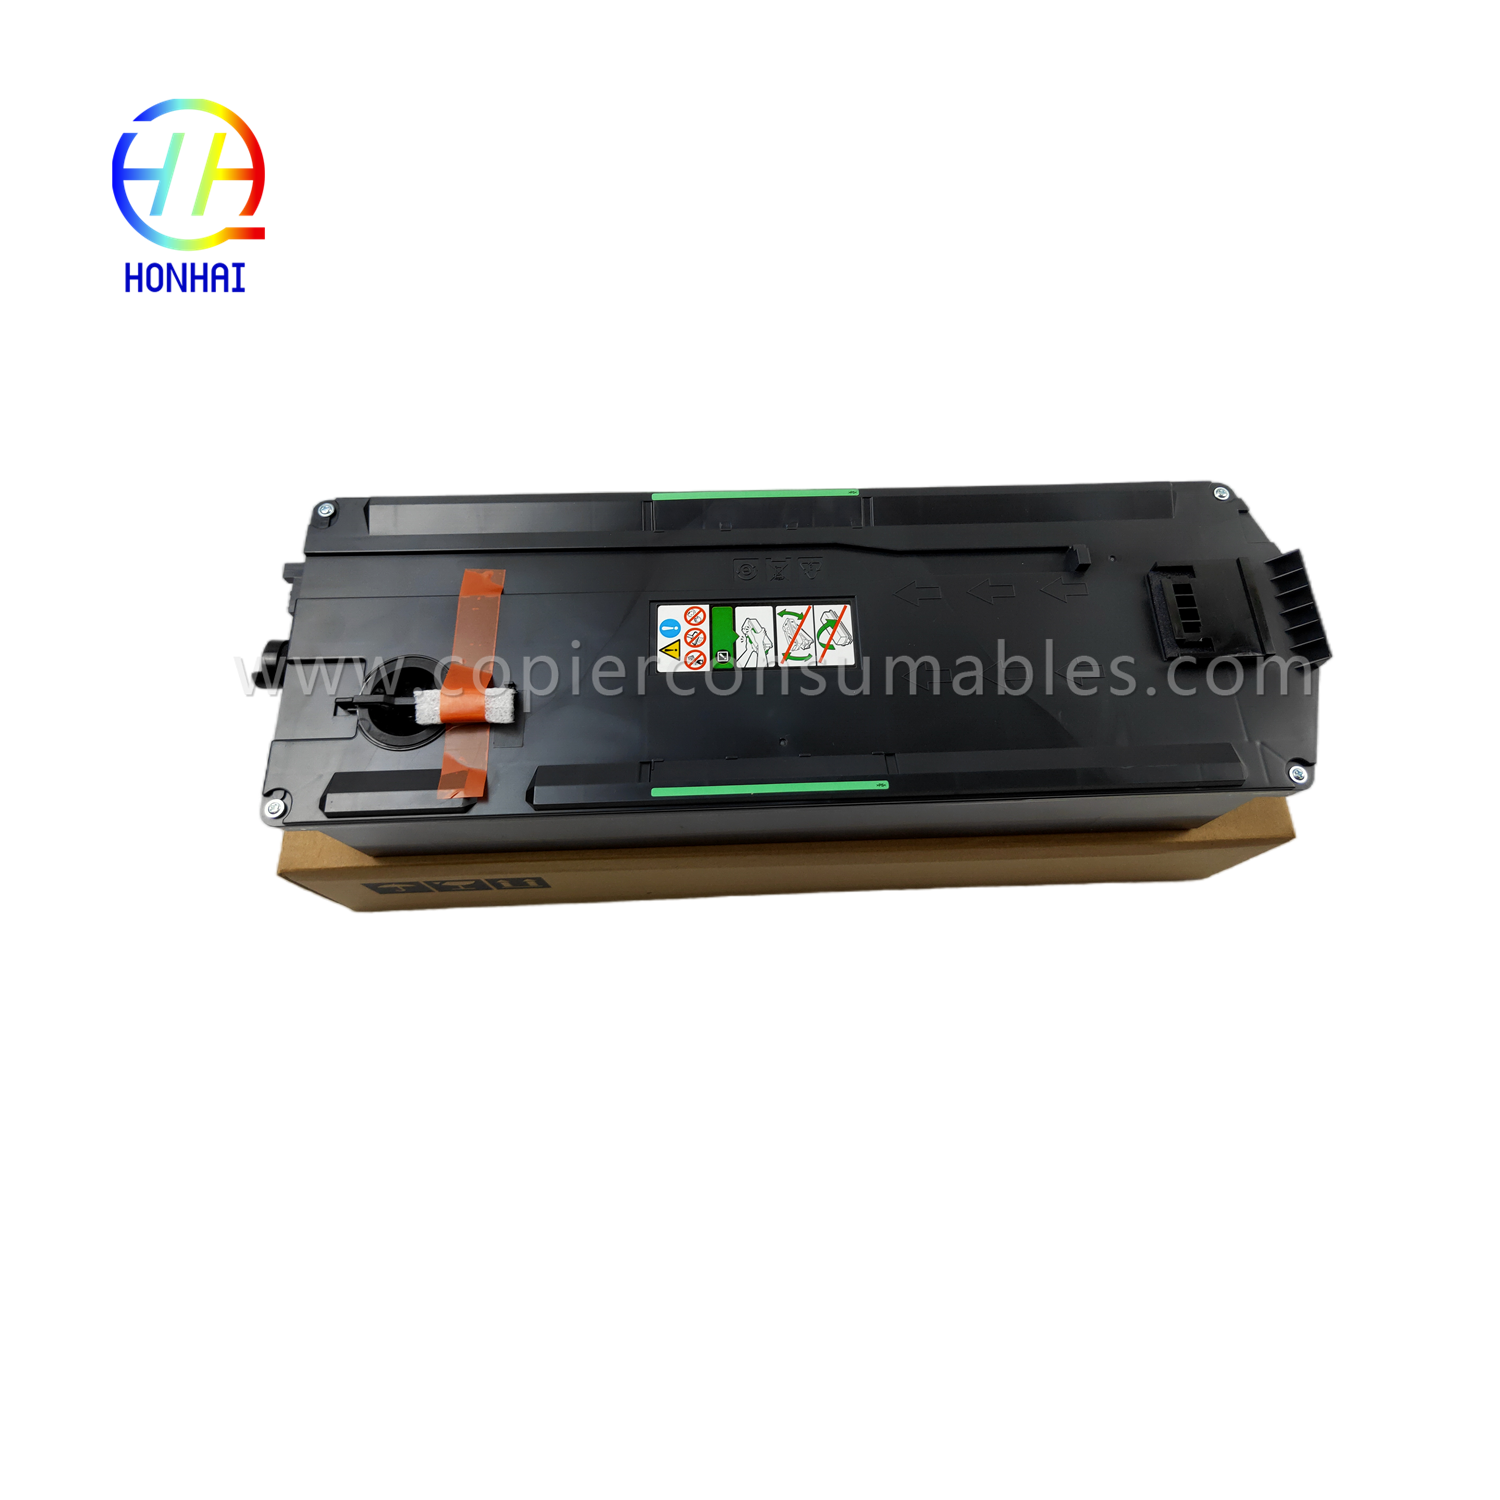 https://www.copierconsumables.com/waste-toner-bottle-for-ricoh-d2426400-mpc2003-c2004-c2503-c2504-c3003-c3004-c3503-c3504-c4503-c4504-c501sp-c5503-c6003-c6004-waste-toner-container-product/